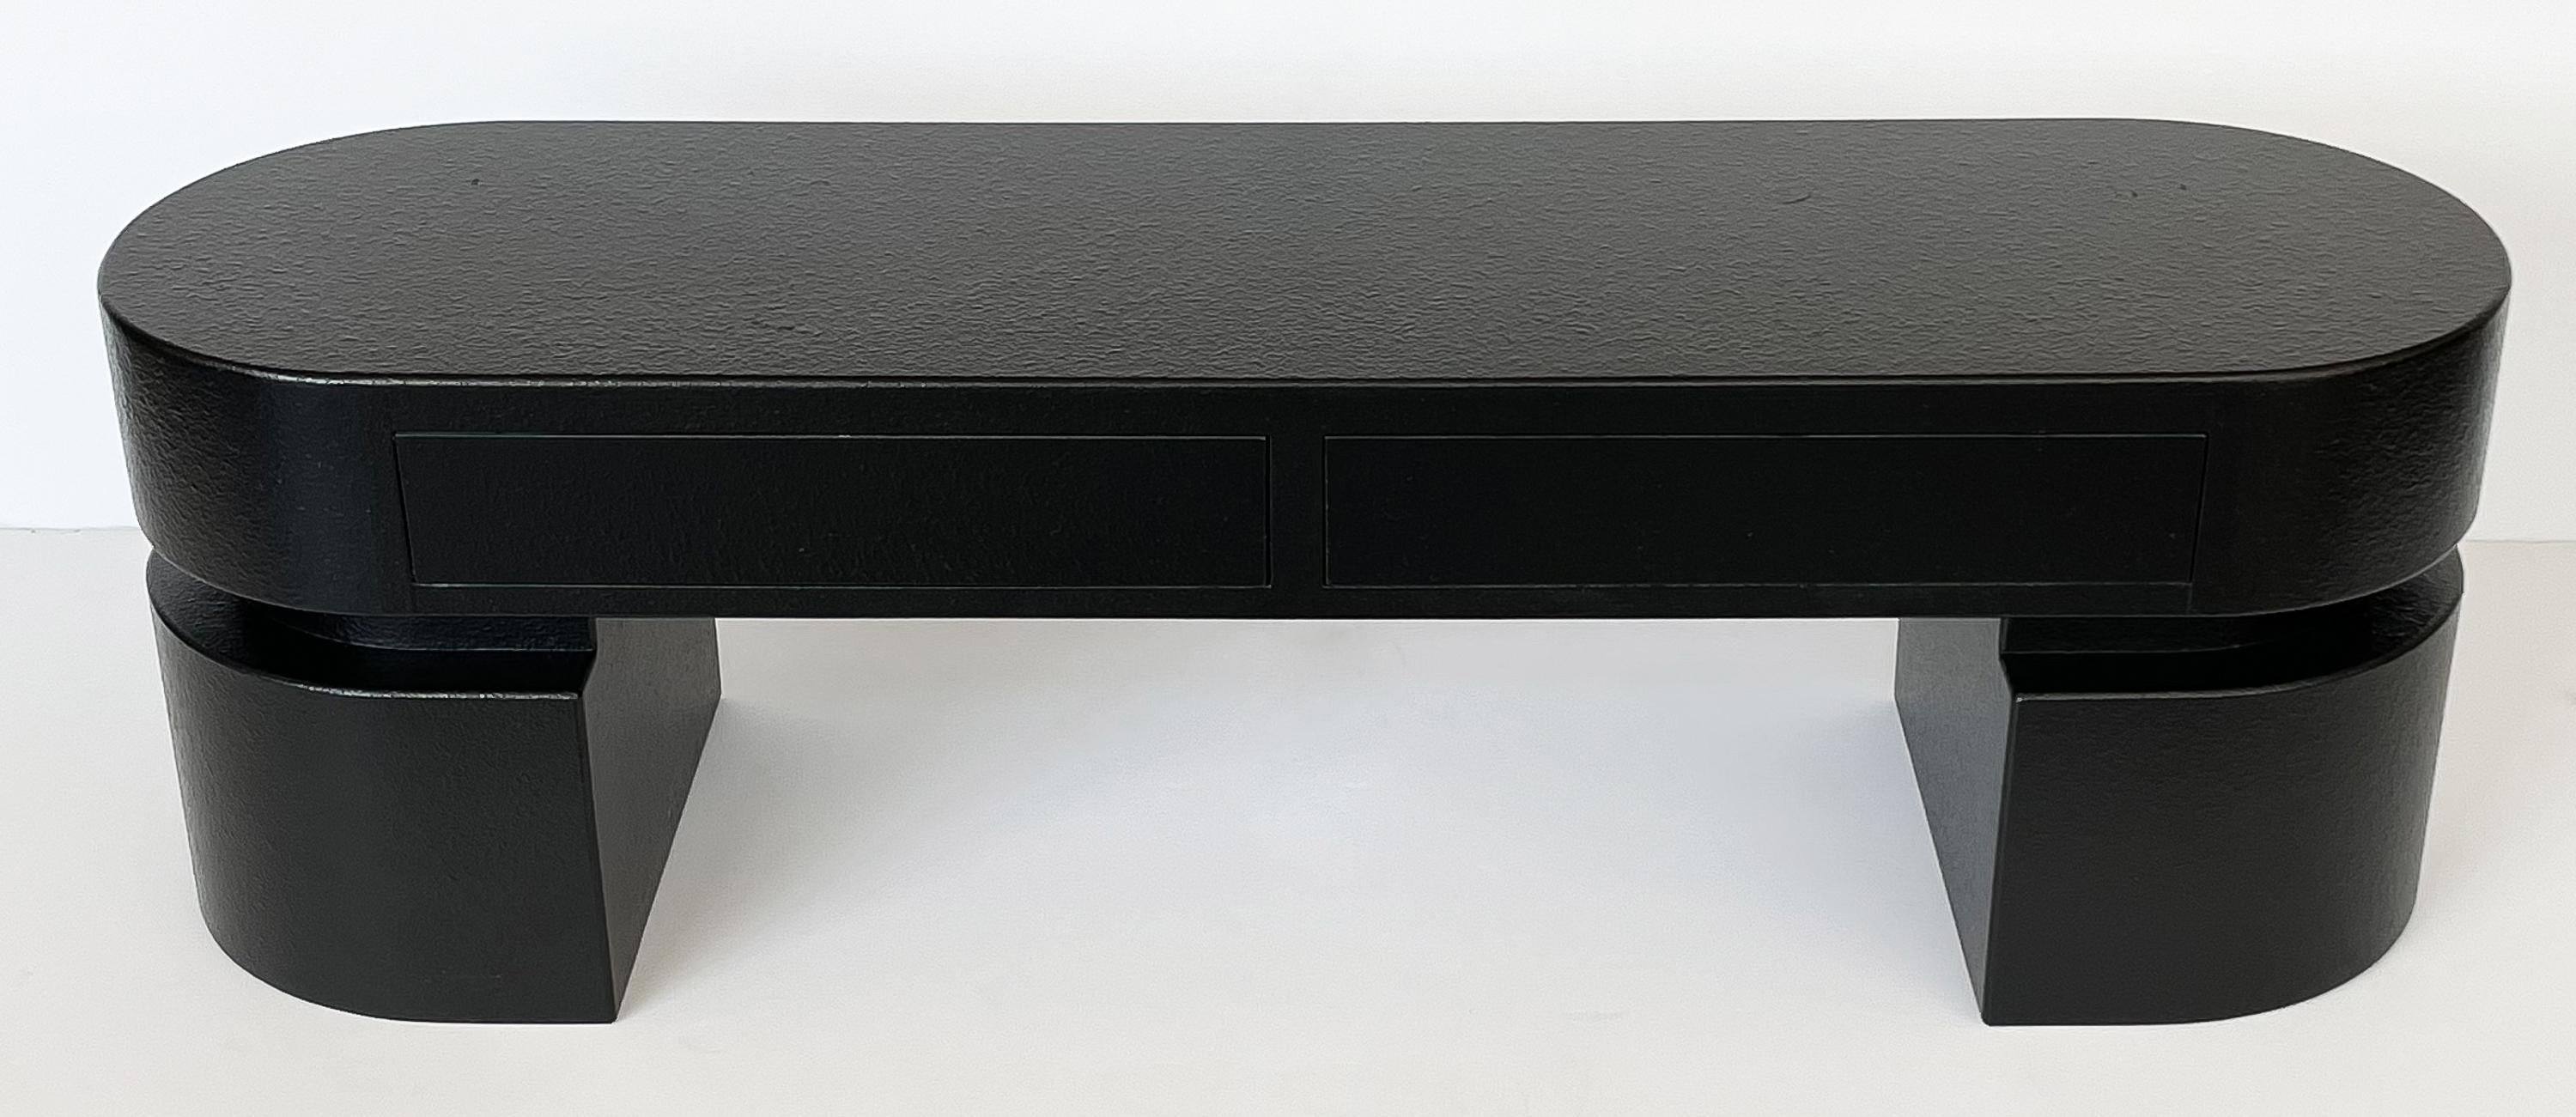 Minimalist modern black narrow coffee table / bench, circa early 1980s. A long narrow pill shaped top with curved pedestal legs at each end. The legs have a 2